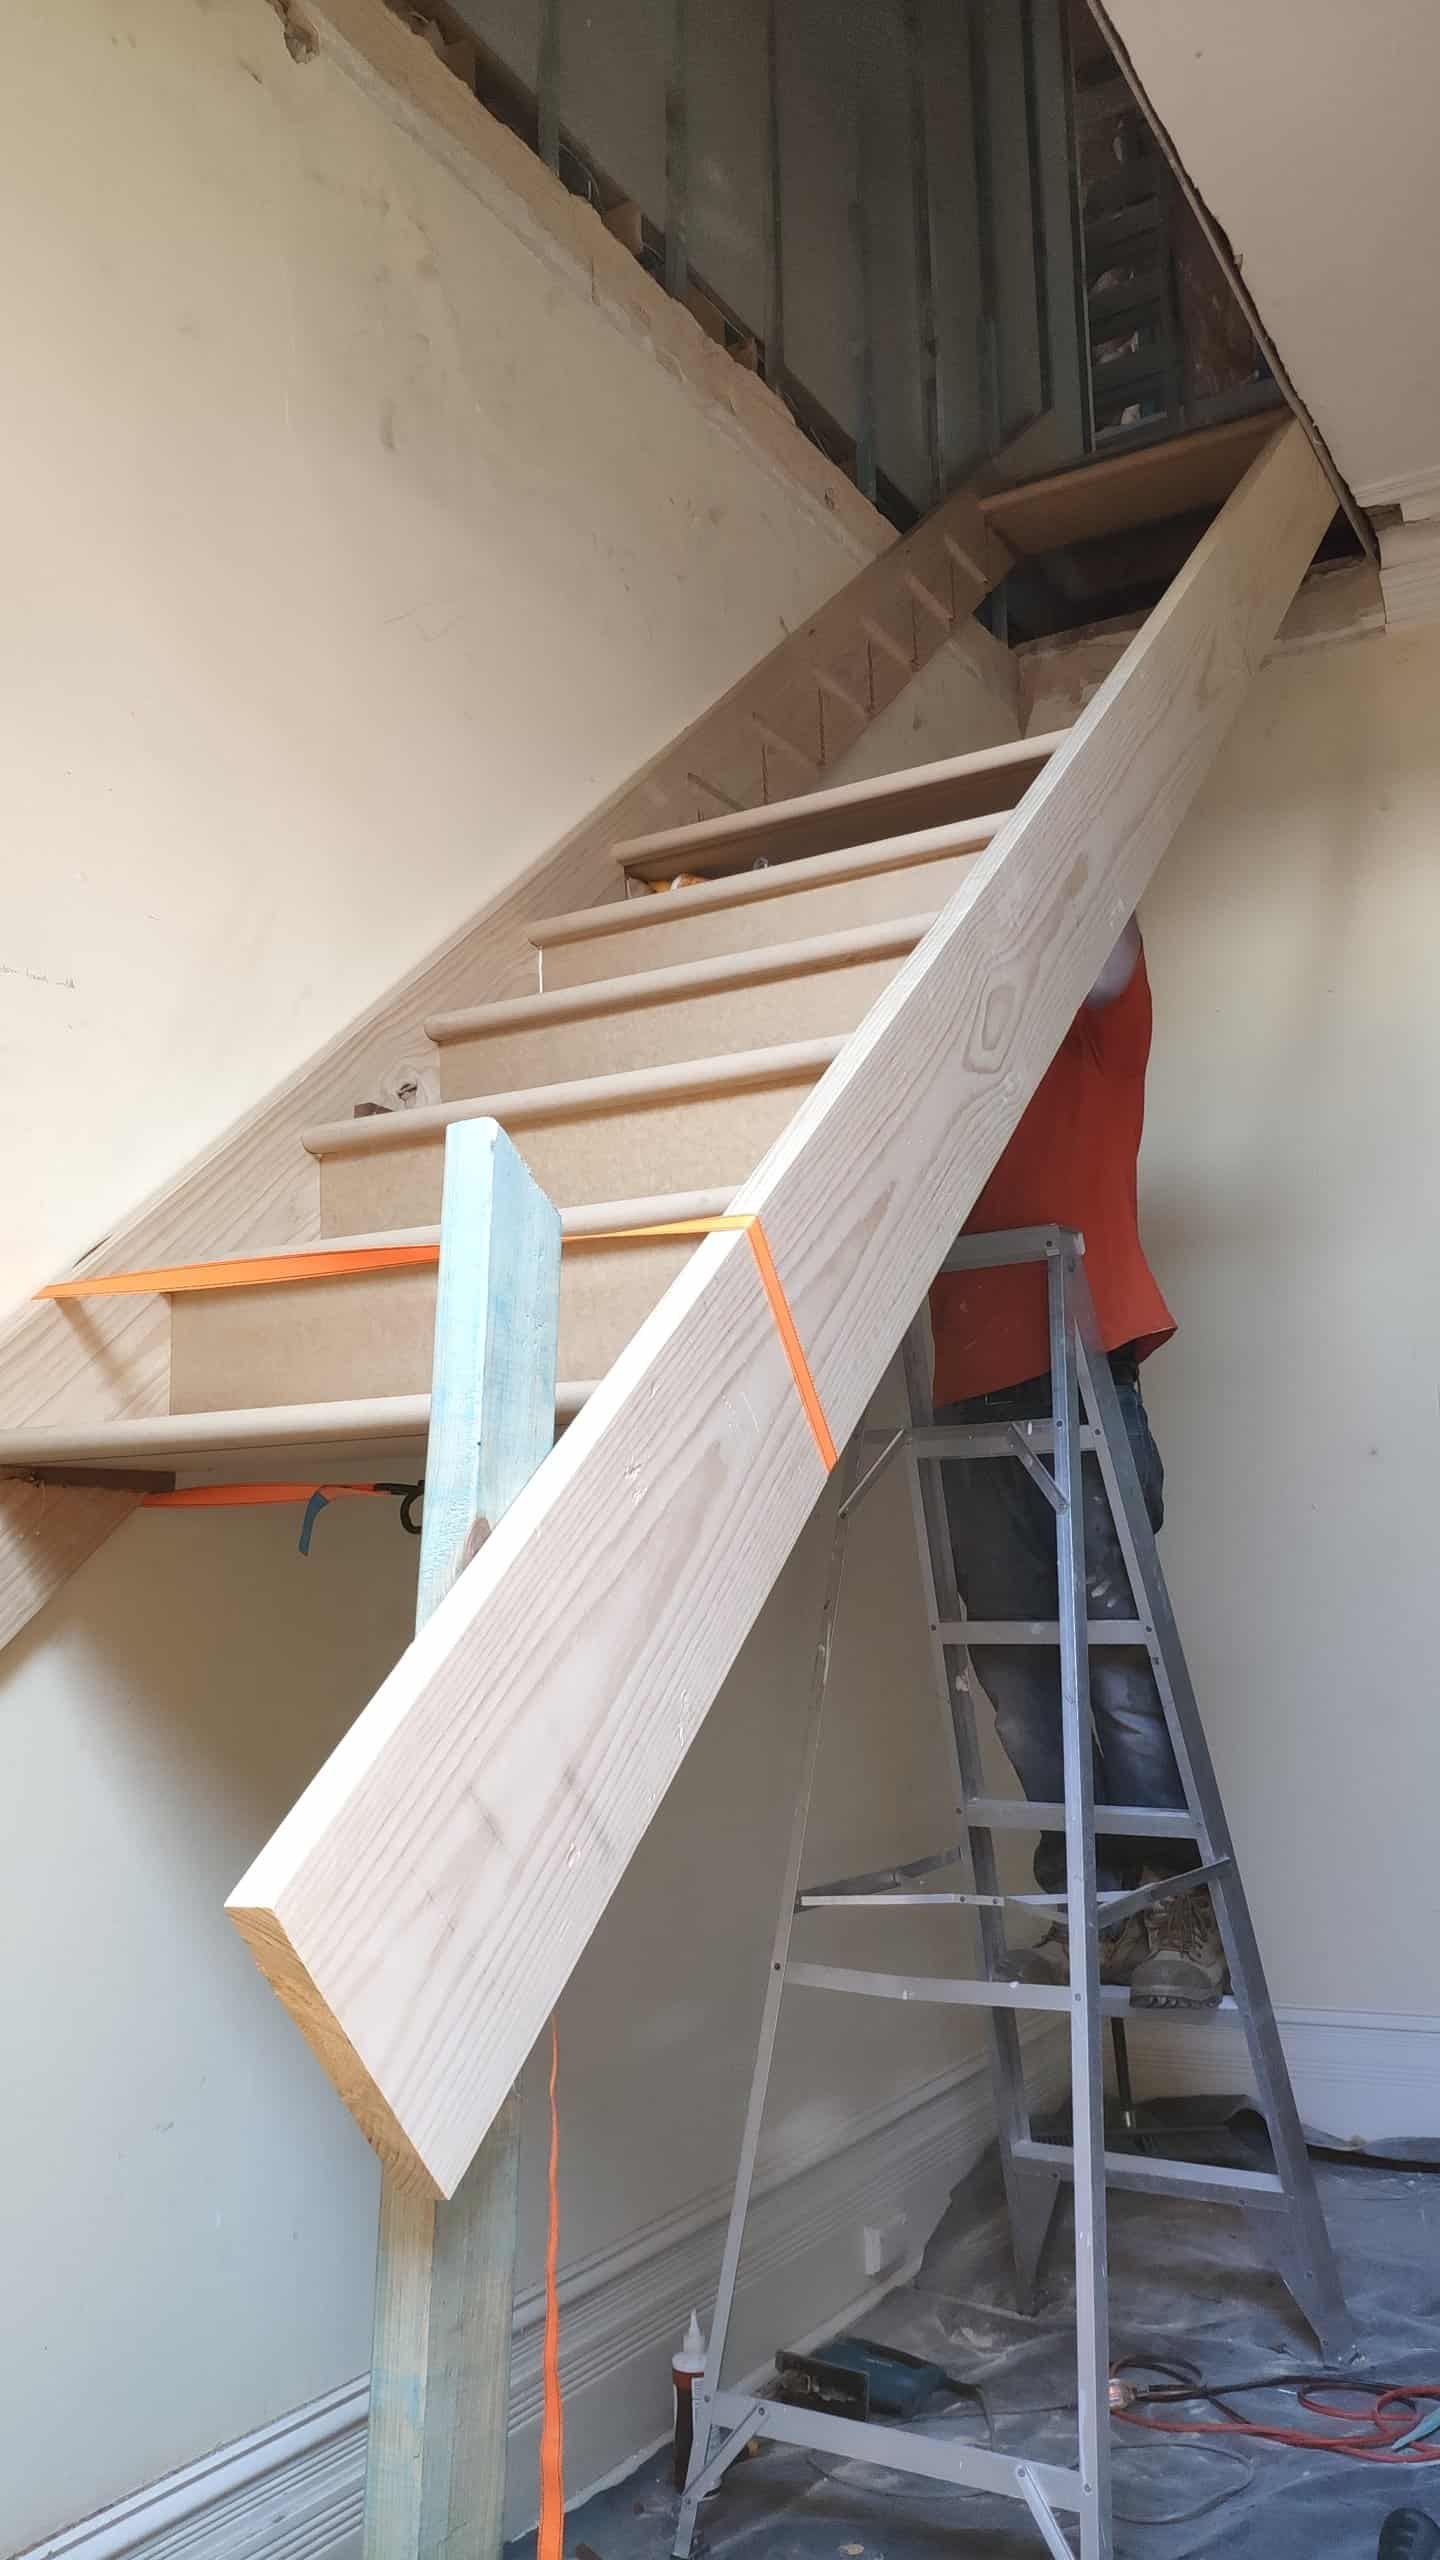 Part way process of installation of a staircase